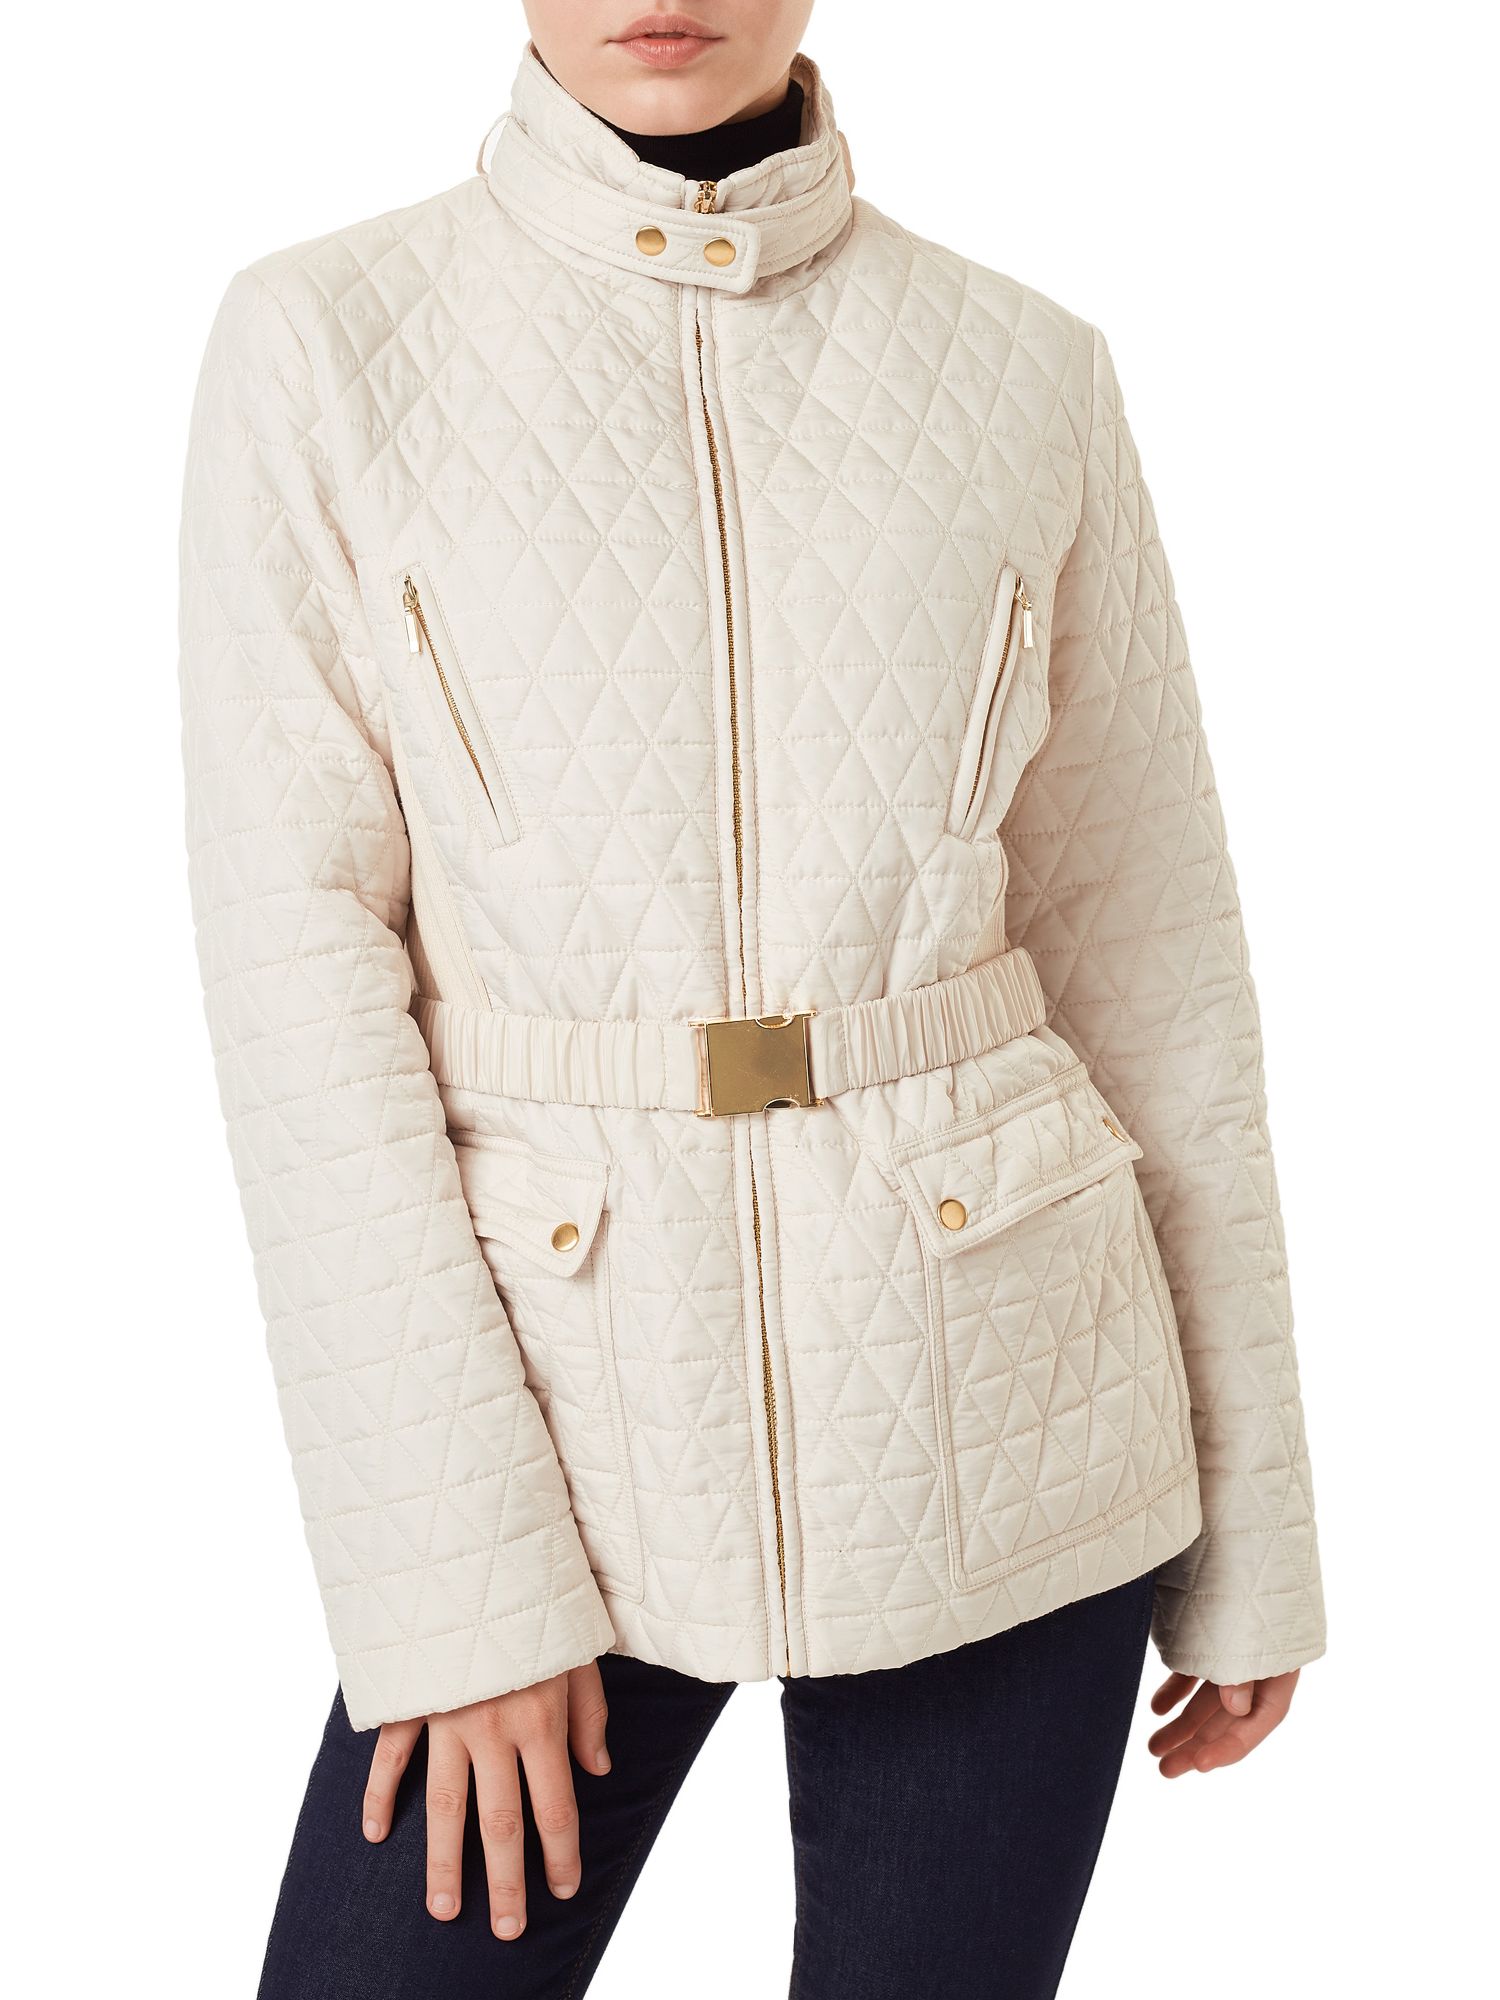 Precis Petite Evie Quilted Jacket, Light Neutral at John Lewis & Partners